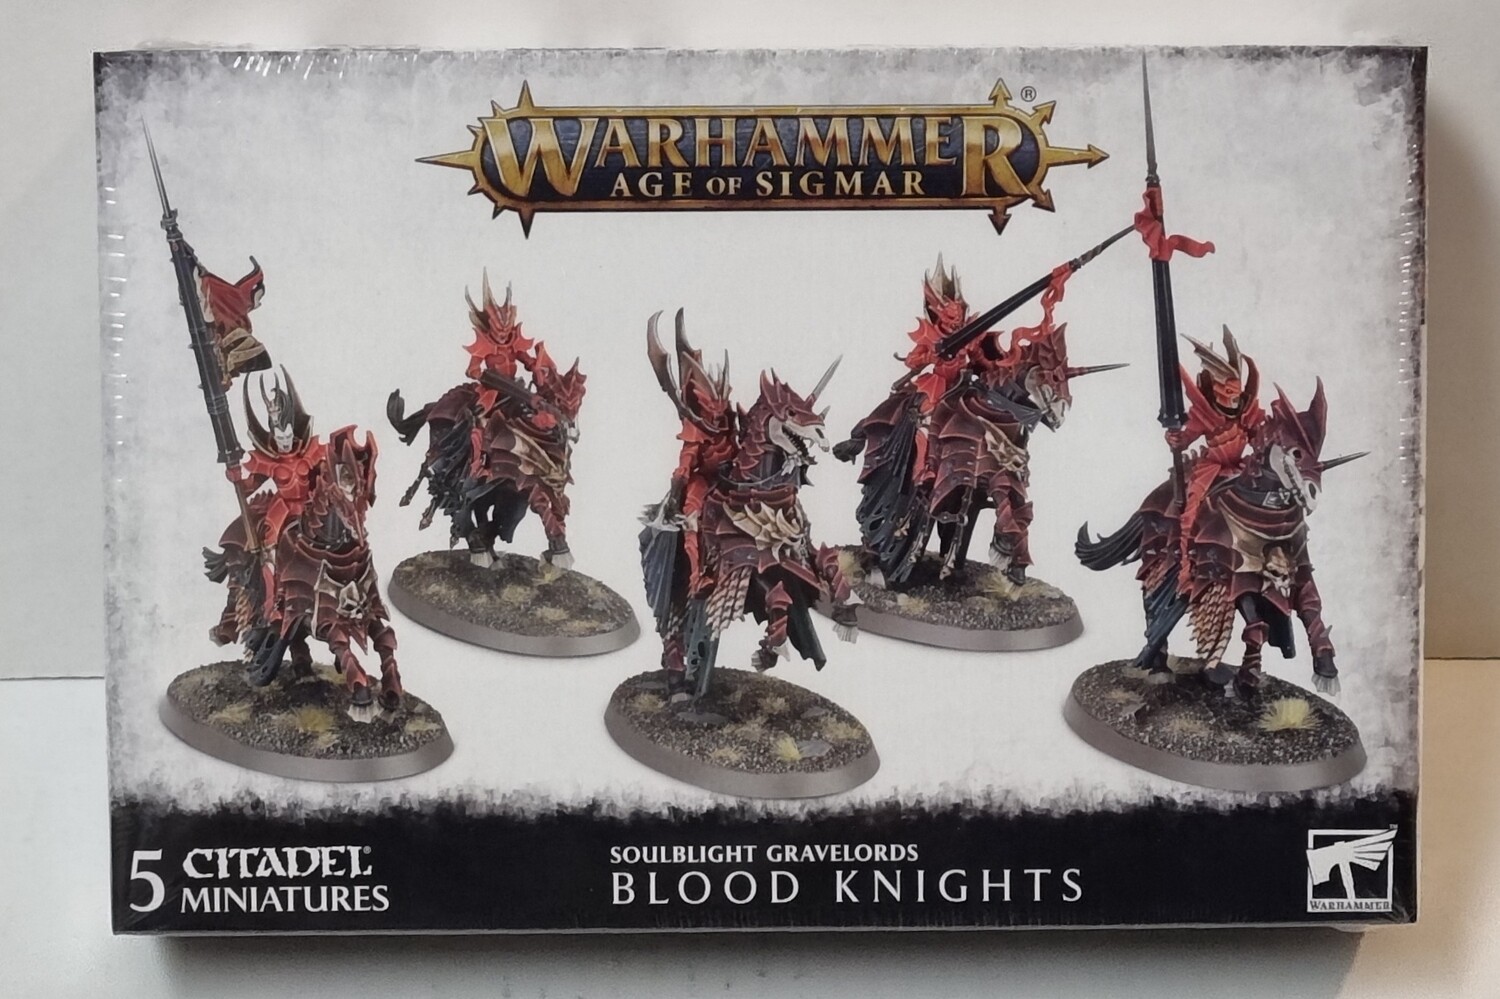 Warhammer, Age of Sigmar, 91-41, Soulblight Gravelords: Blood Knights